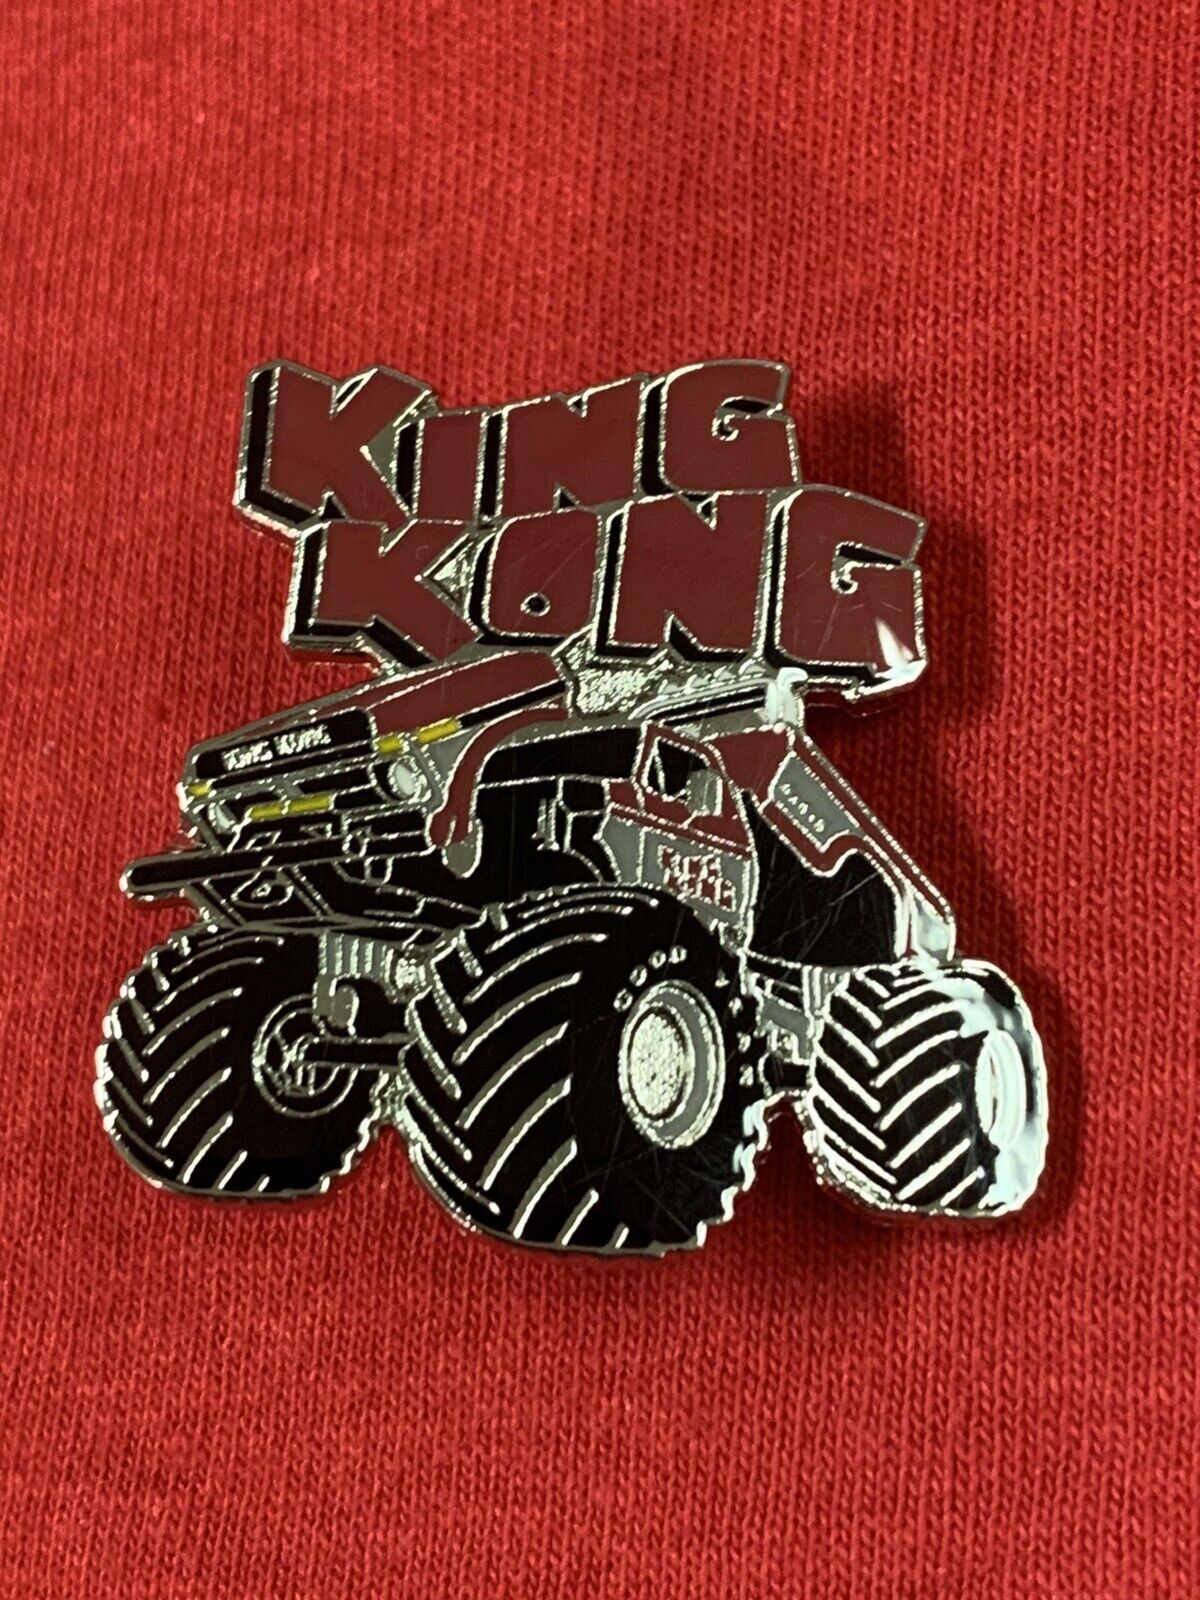 King Kong Monster Truck collectible lapel pin, tie tack, hatpin museum 4X4